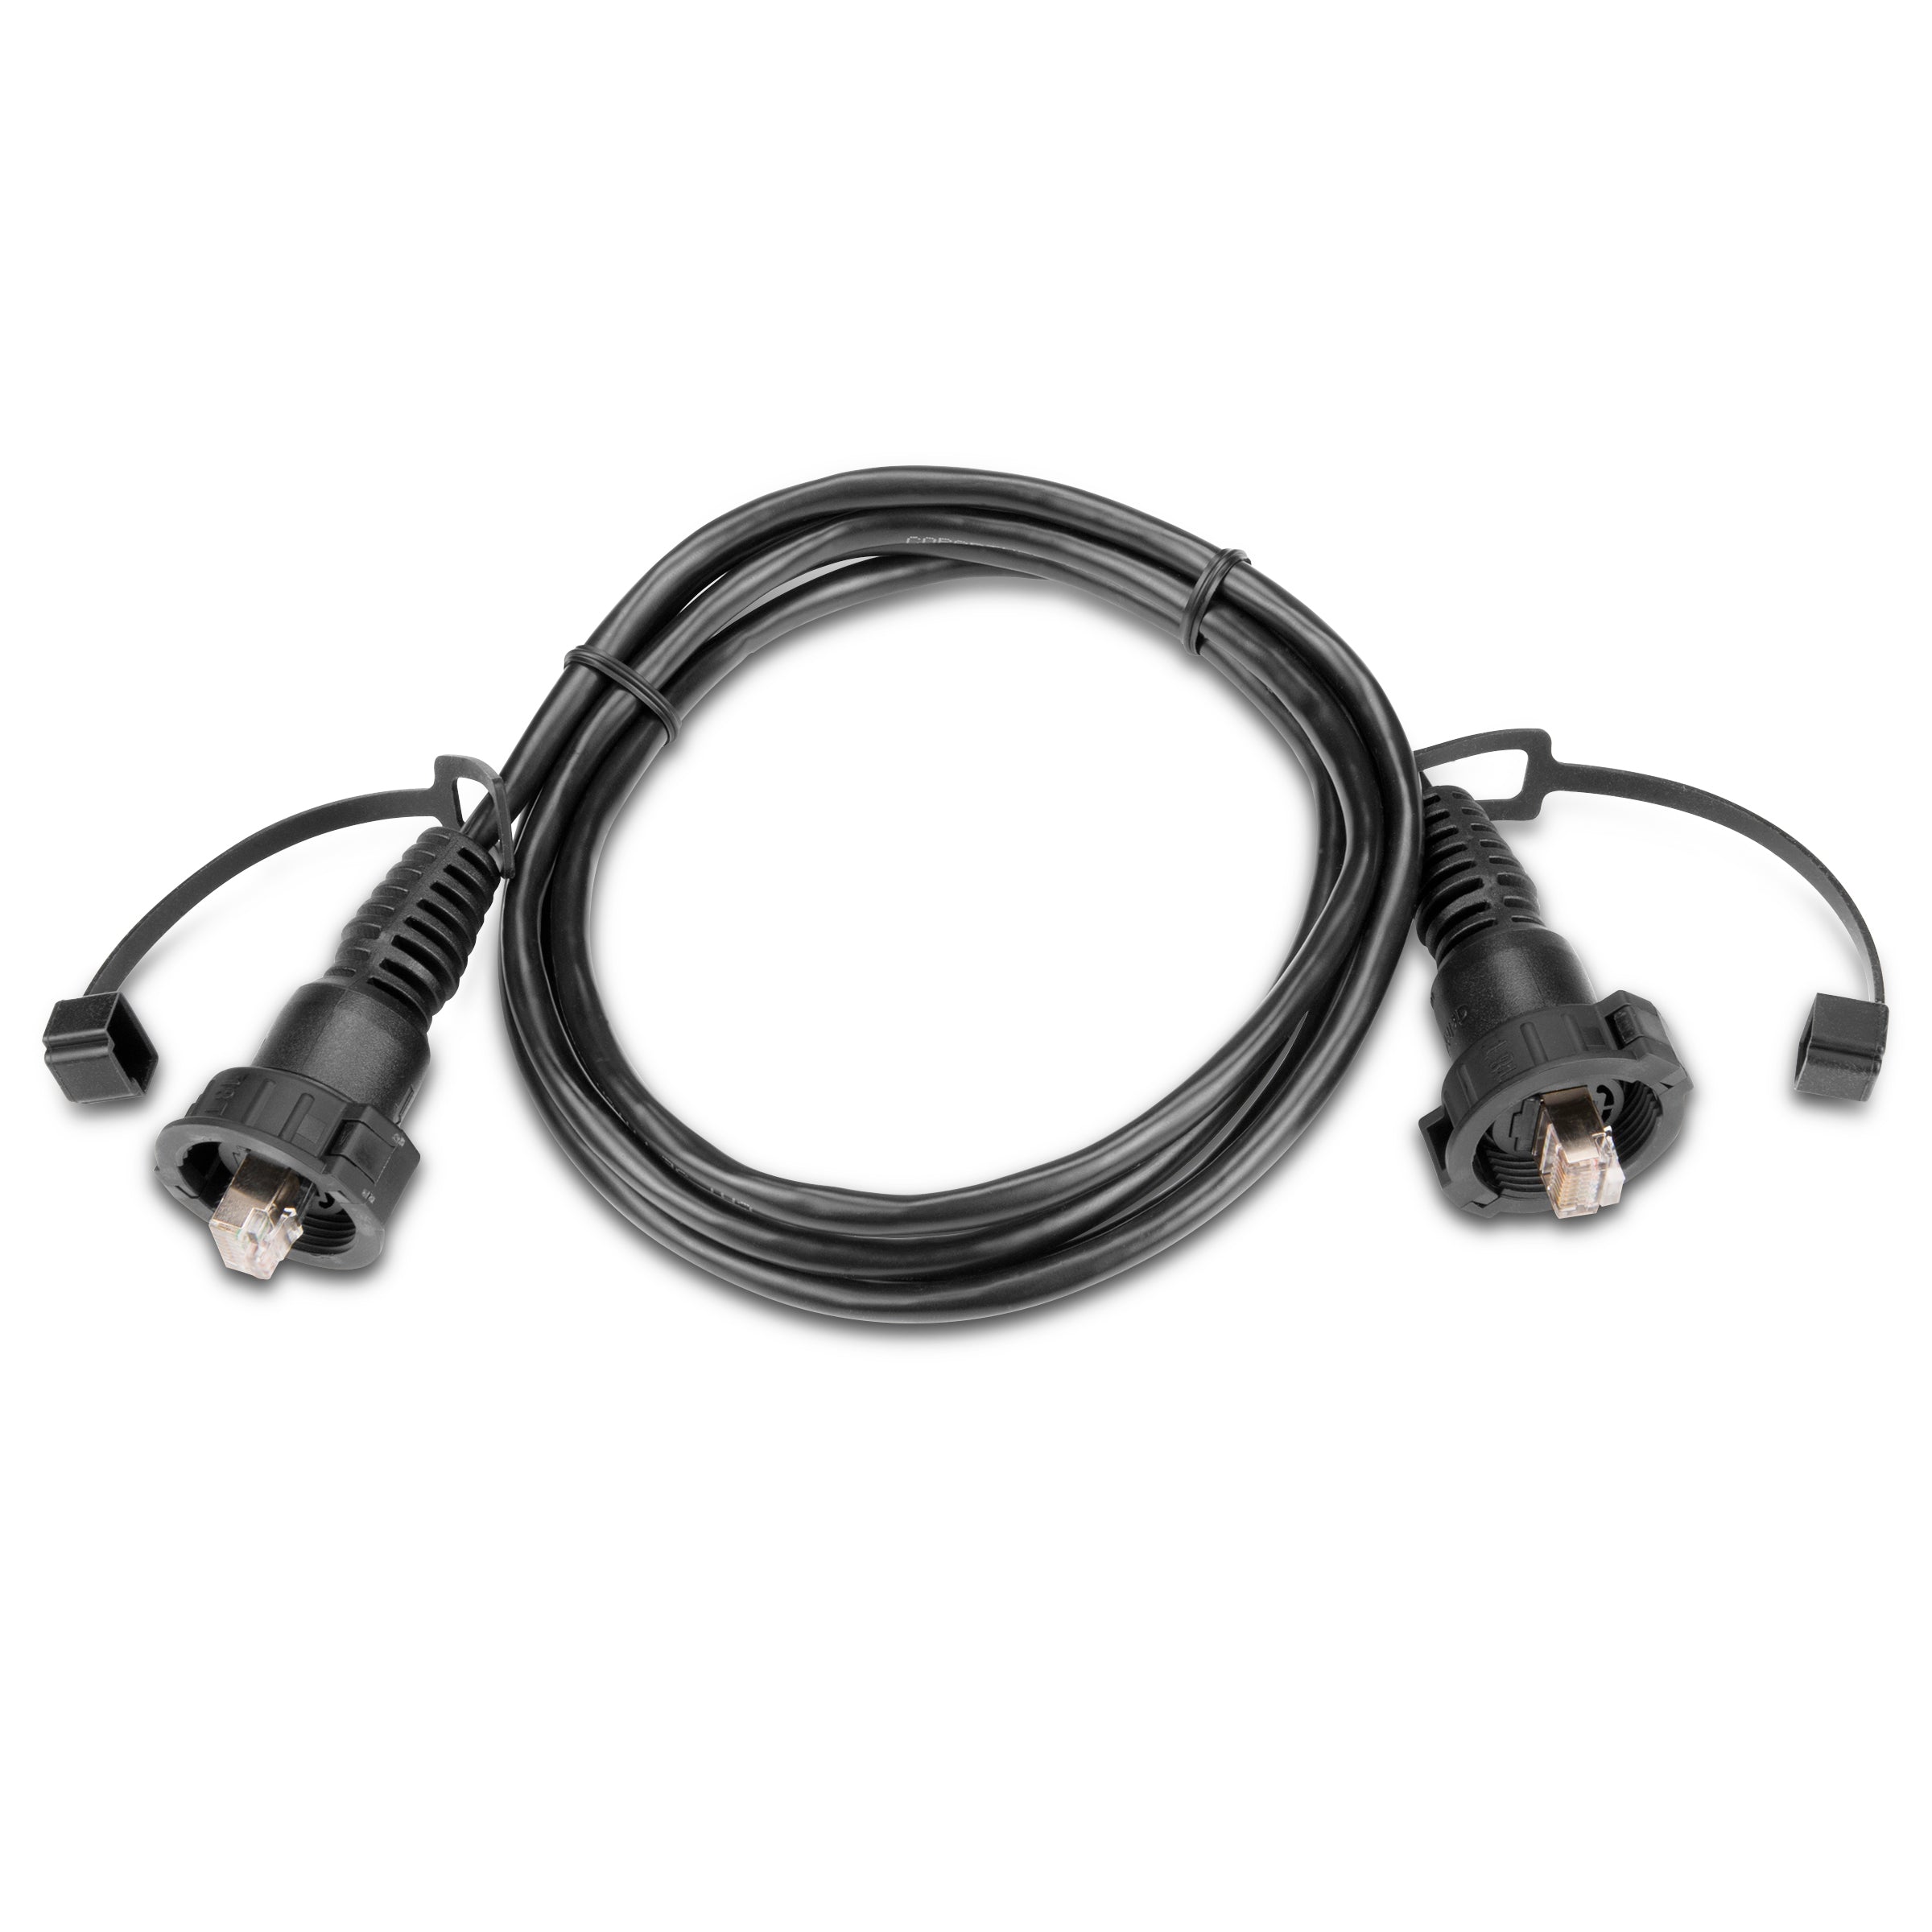 Garmin Marine Network Cable - 20ft